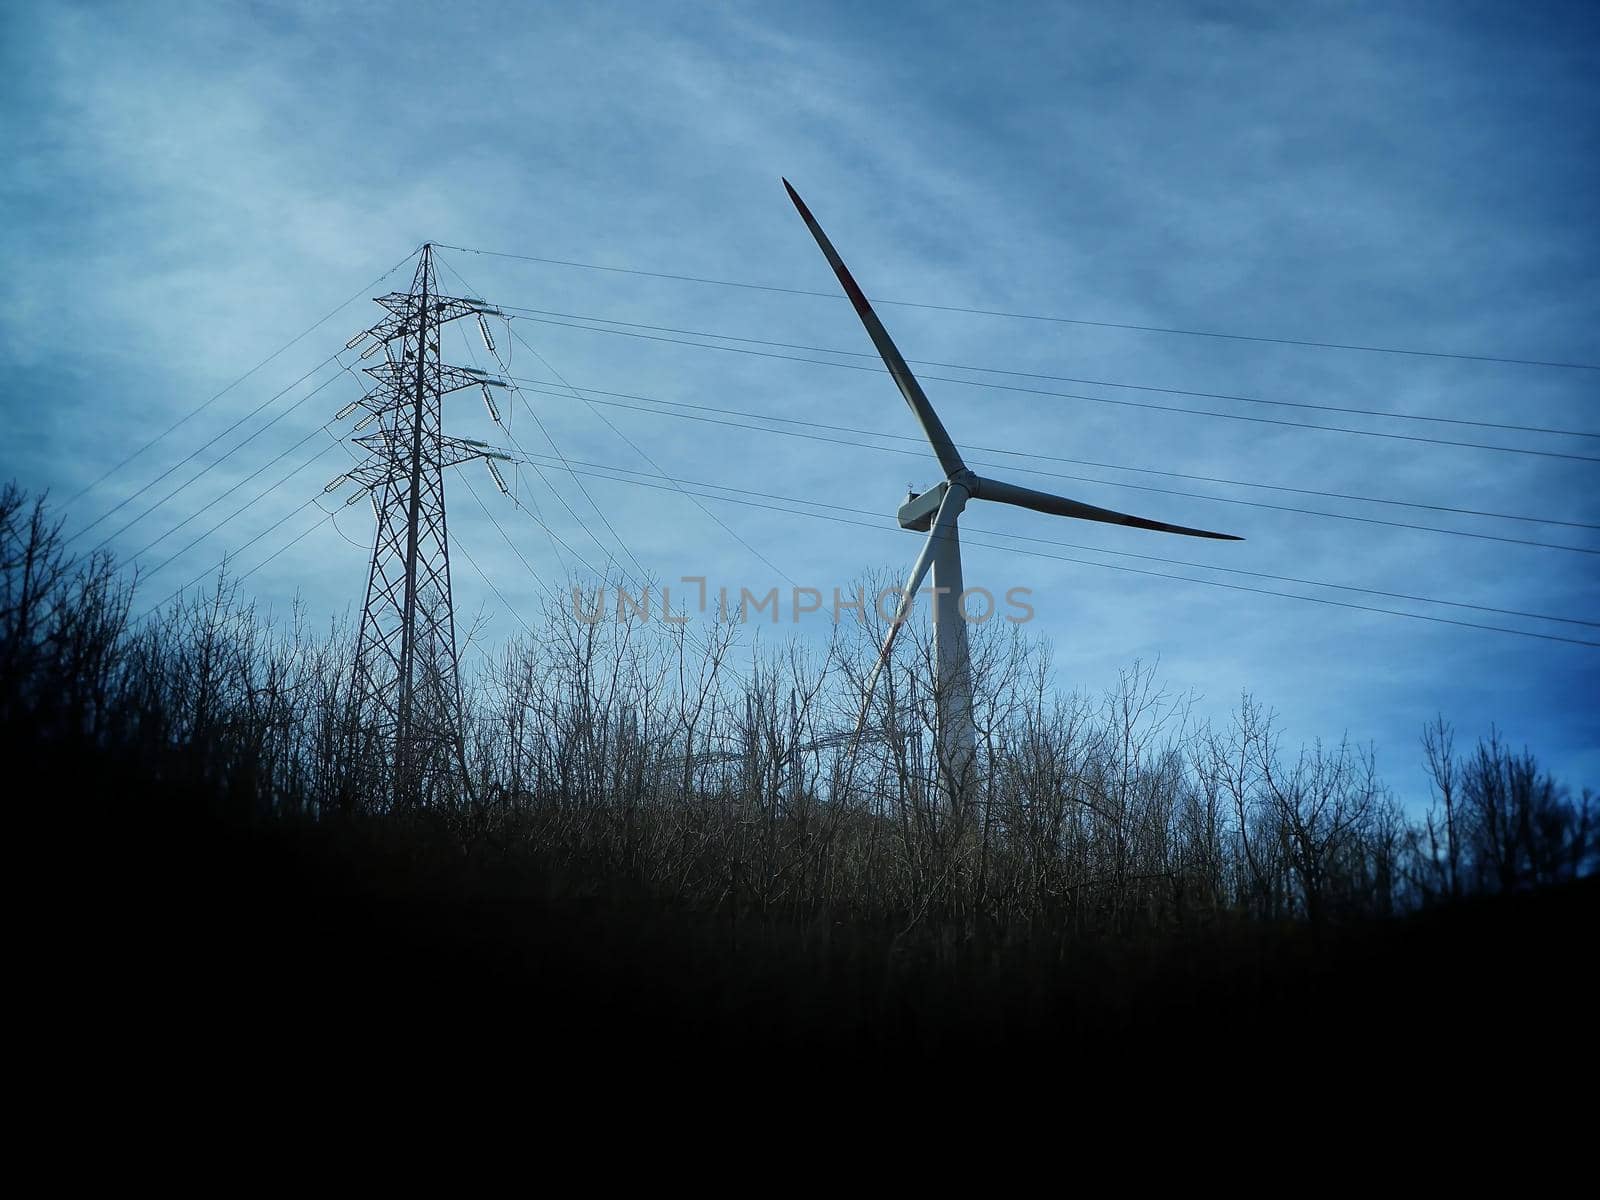 Wind turbine in natural environment near high voltage pylon by lemar